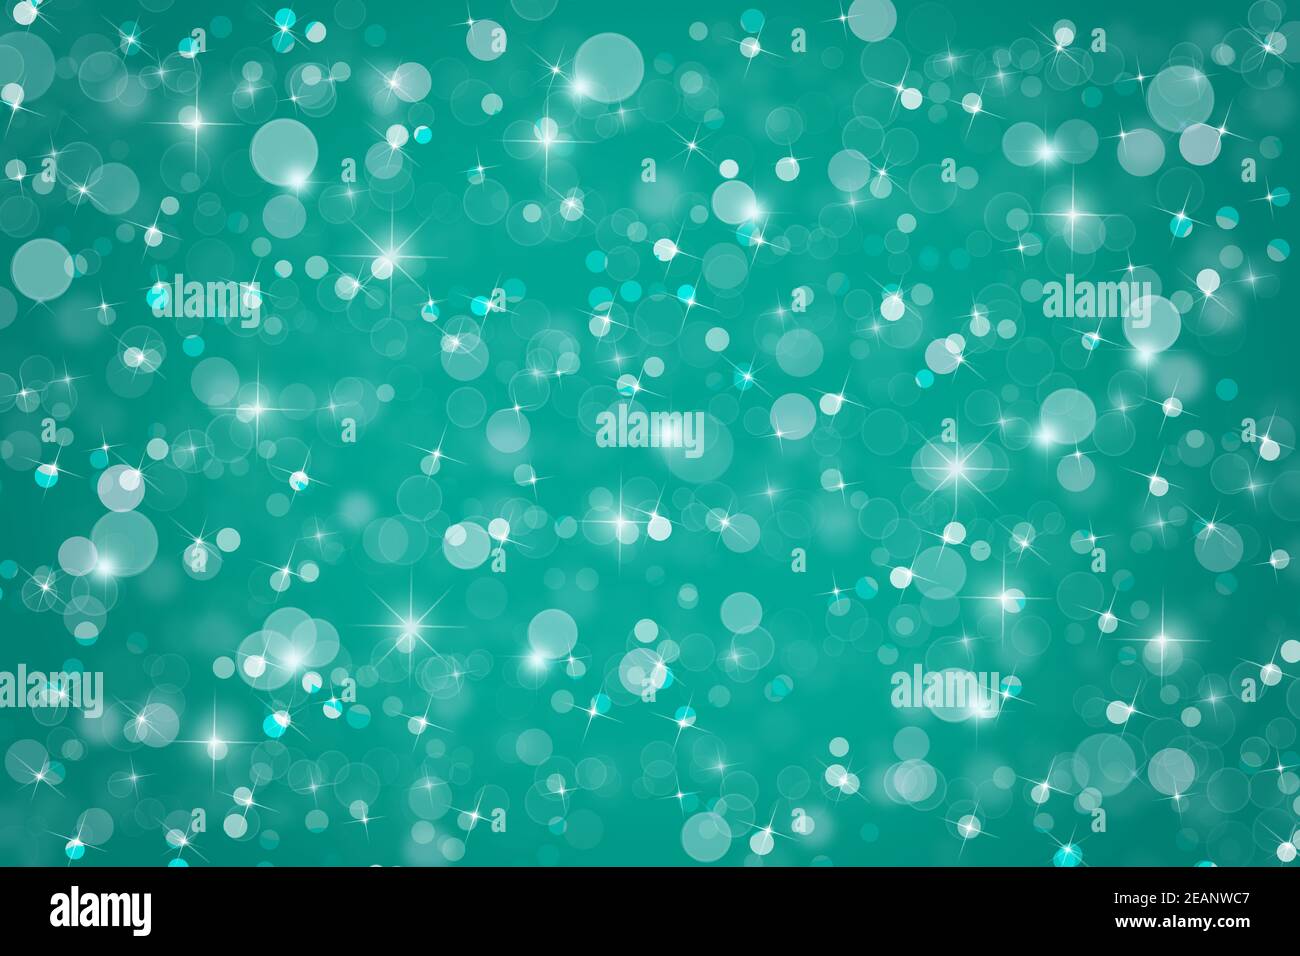 Abstract teal blue Christmas winter background Stock Photo